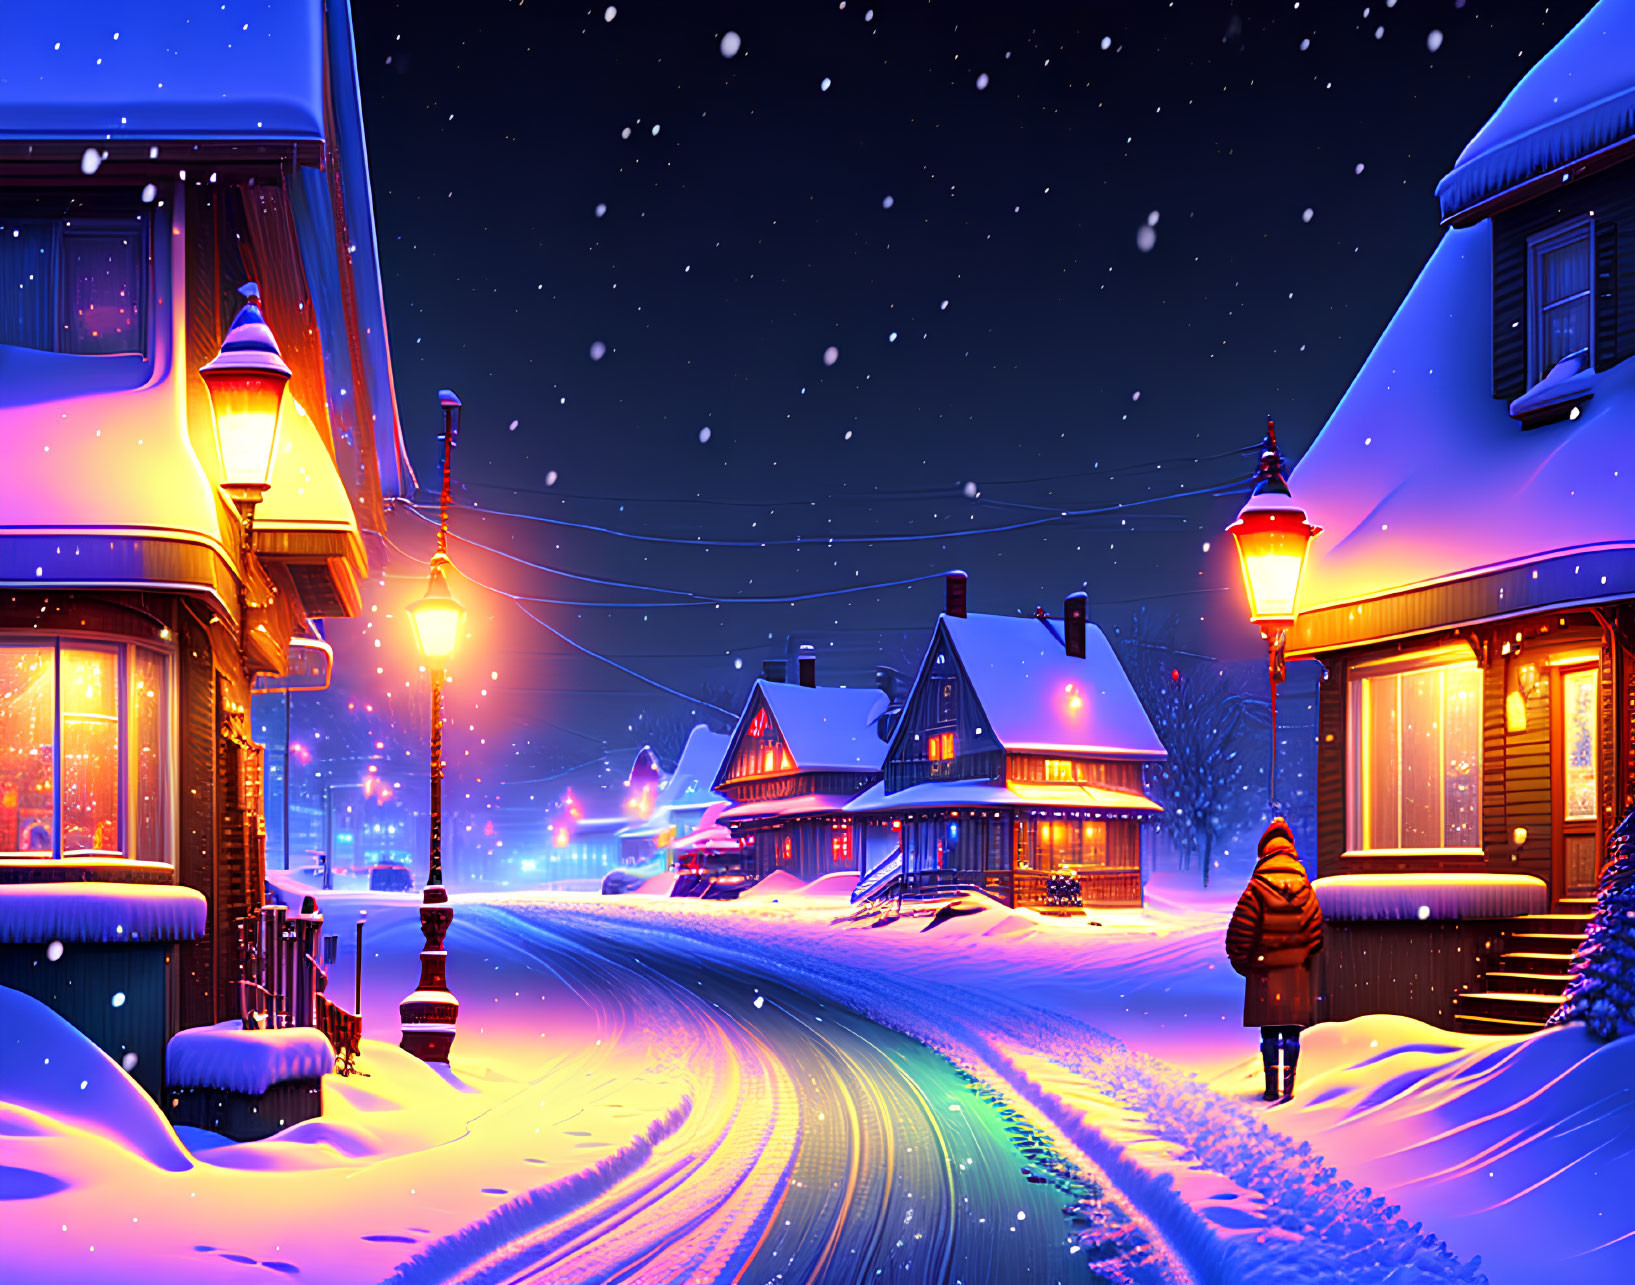 Snow-covered small town at night with illuminated houses, person walking, and falling snowflakes